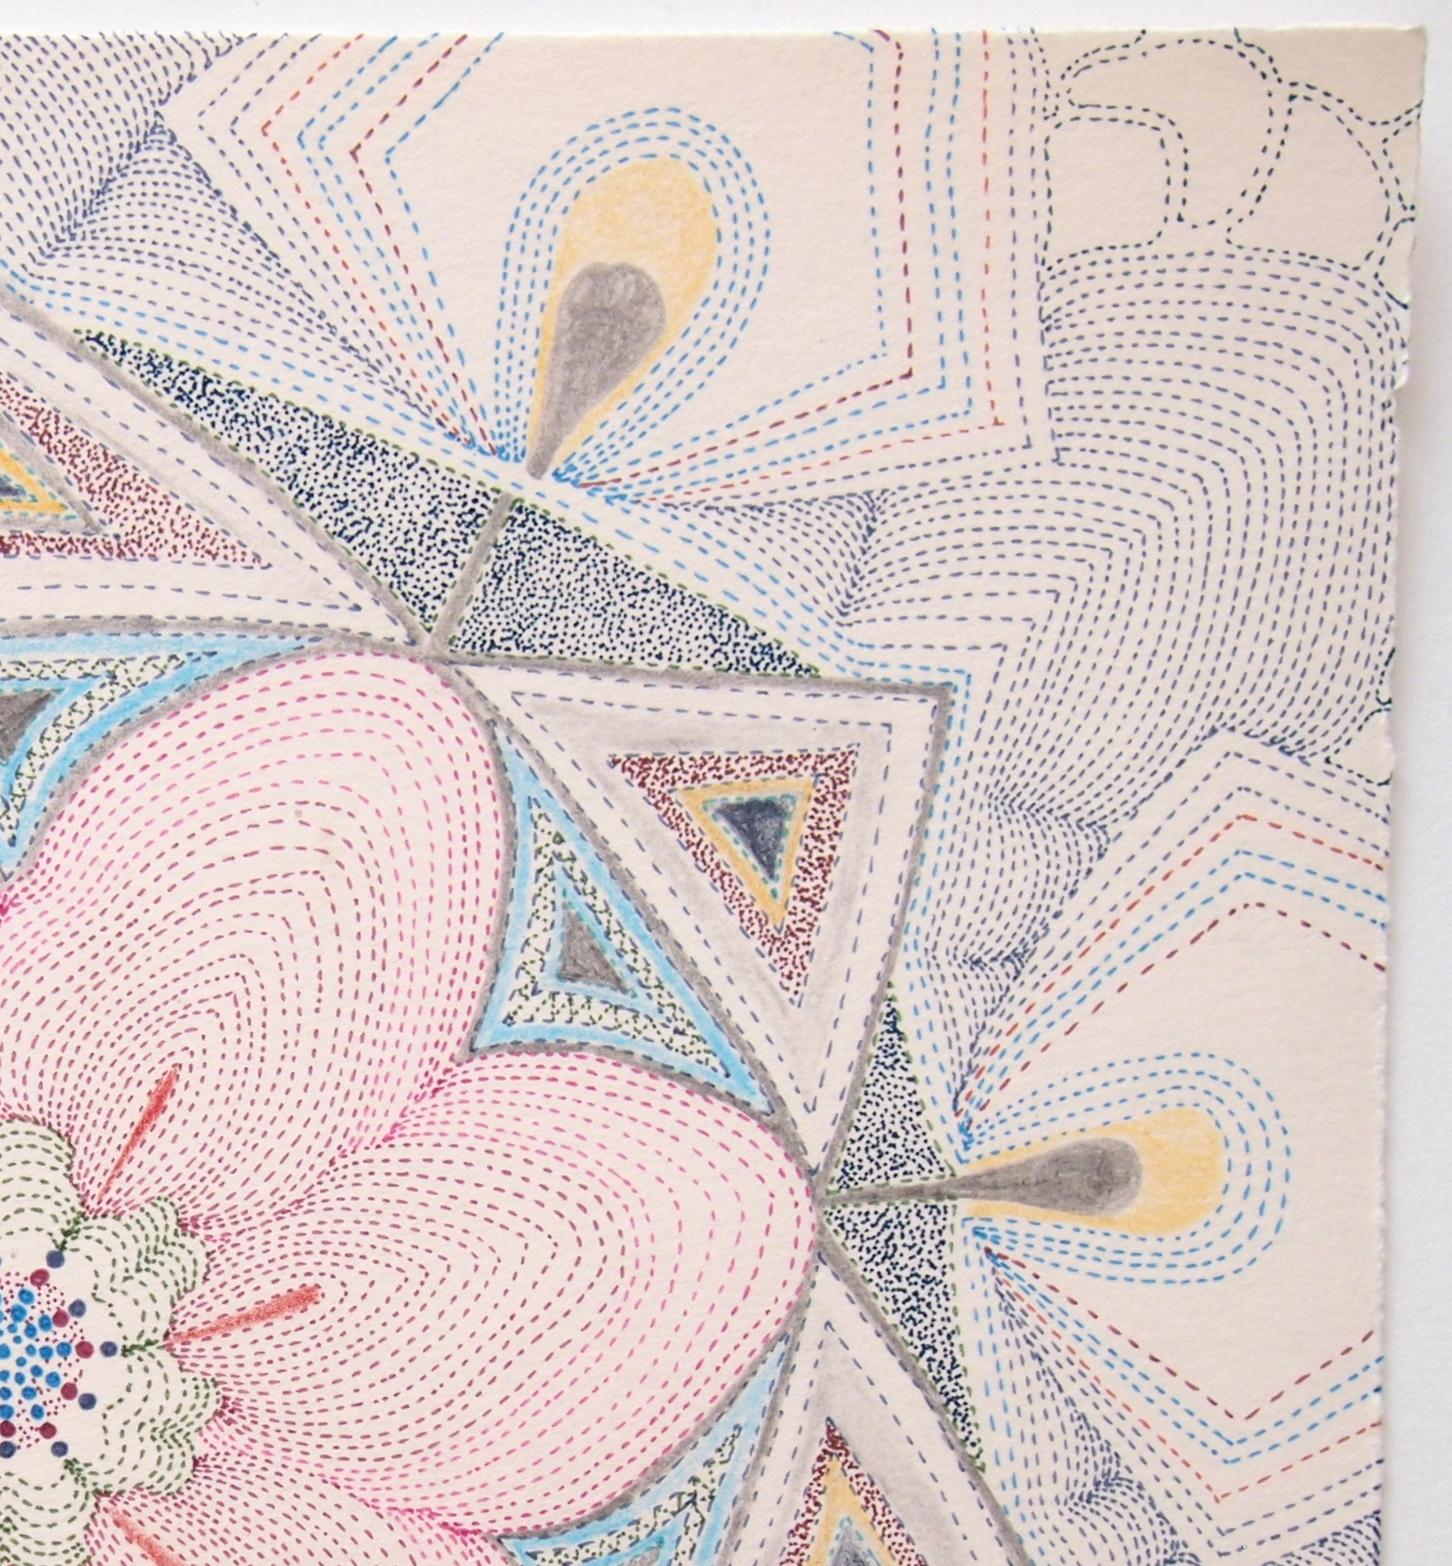 Pink Earth Tonguled, Detailed Square Drawing in Blue, Green, Maroon, Yellow - Beige Abstract Drawing by Sarah Morejohn